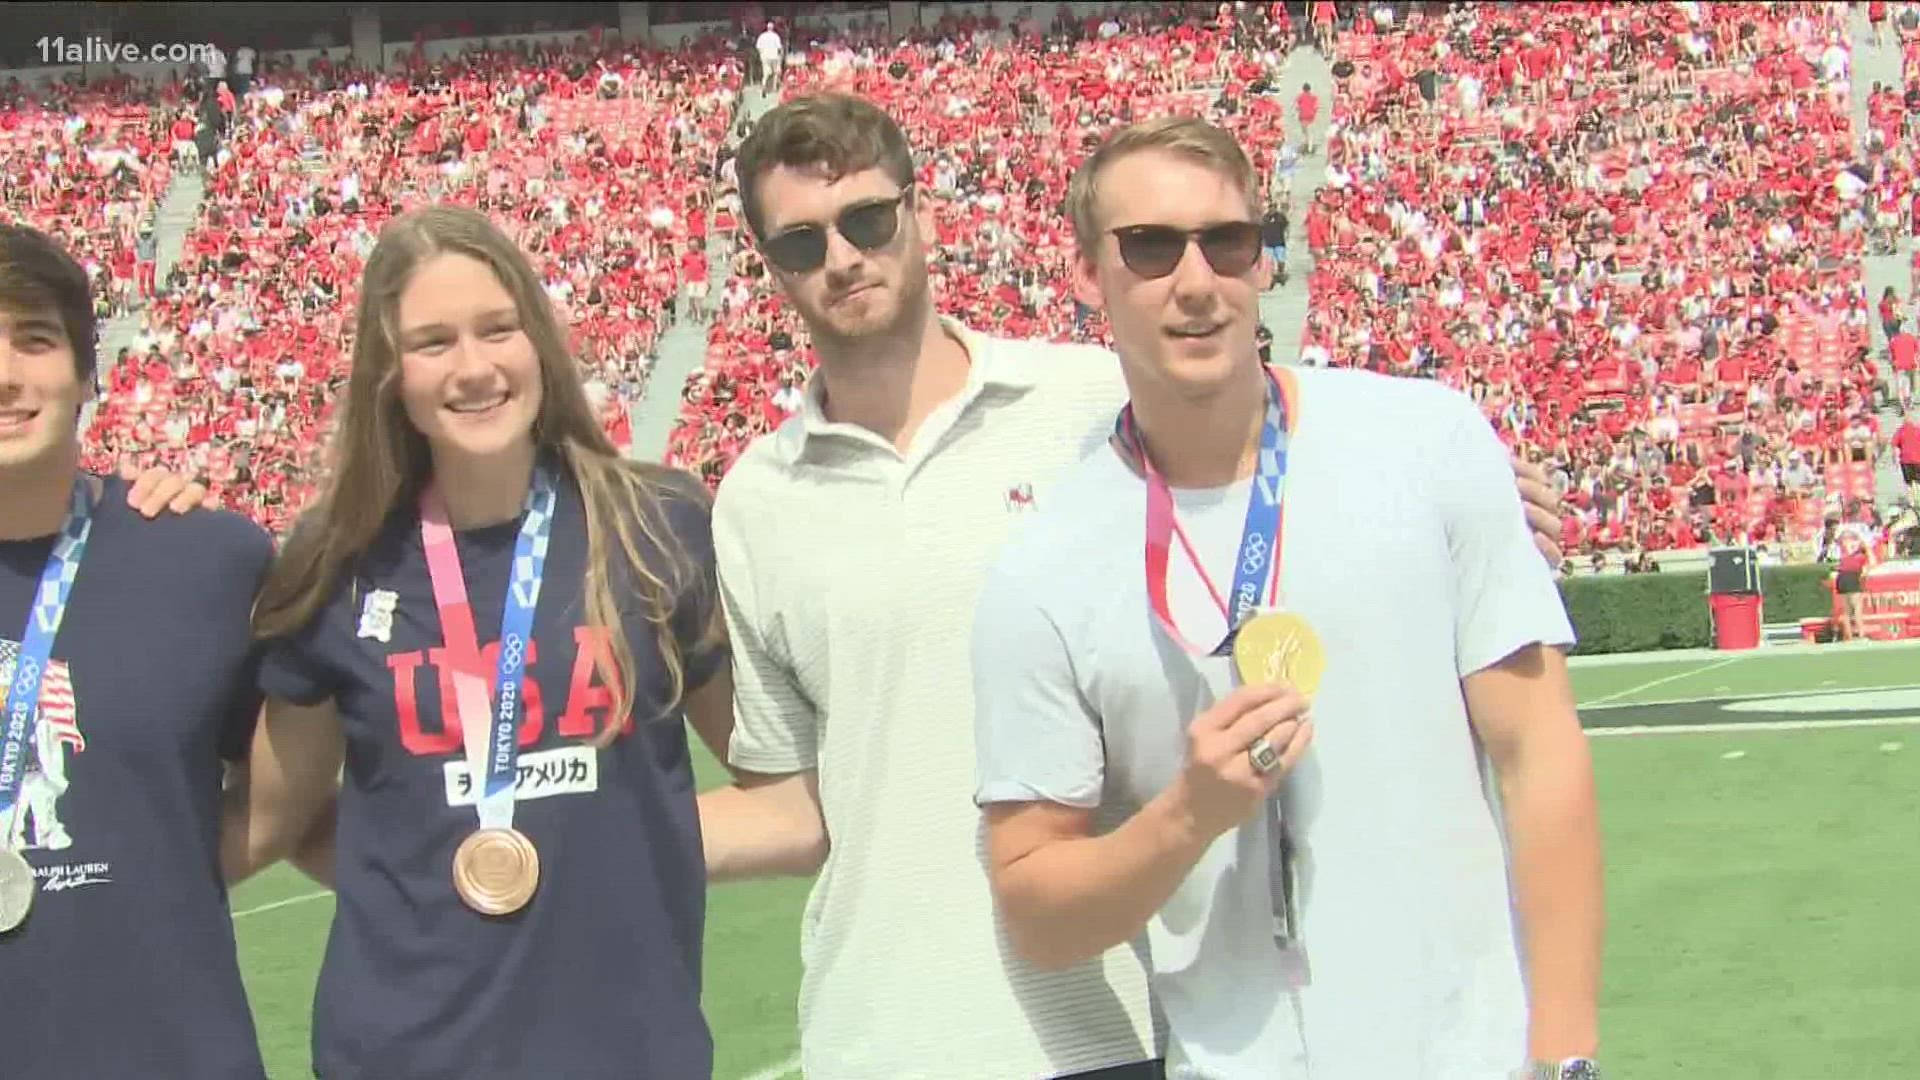 After competing in Tokyo, UGA honored several of its Olympians at Saturday's game.